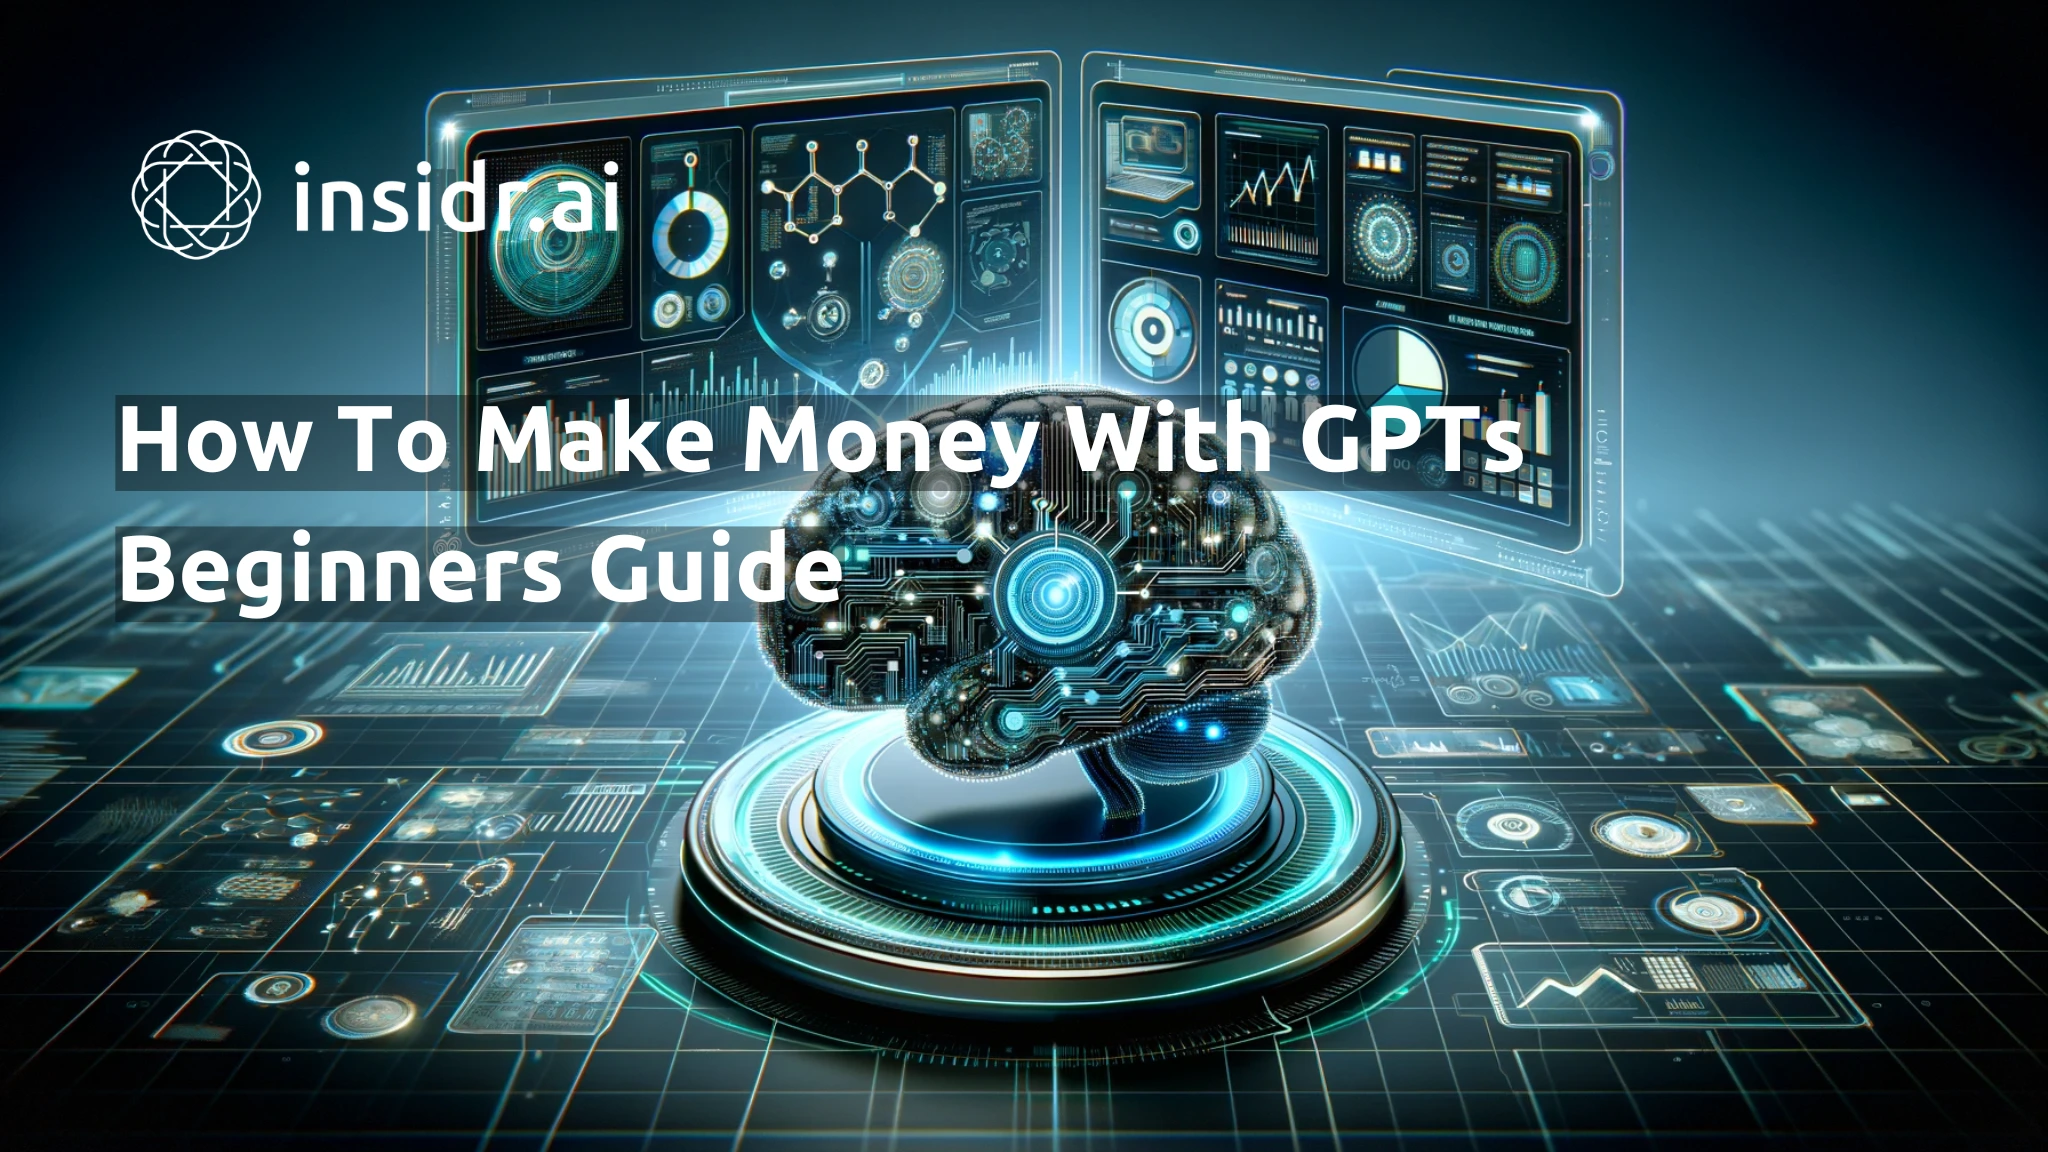 How To Make Money With GPTs - Beginner Guide (OpenAI Custom GPTs)